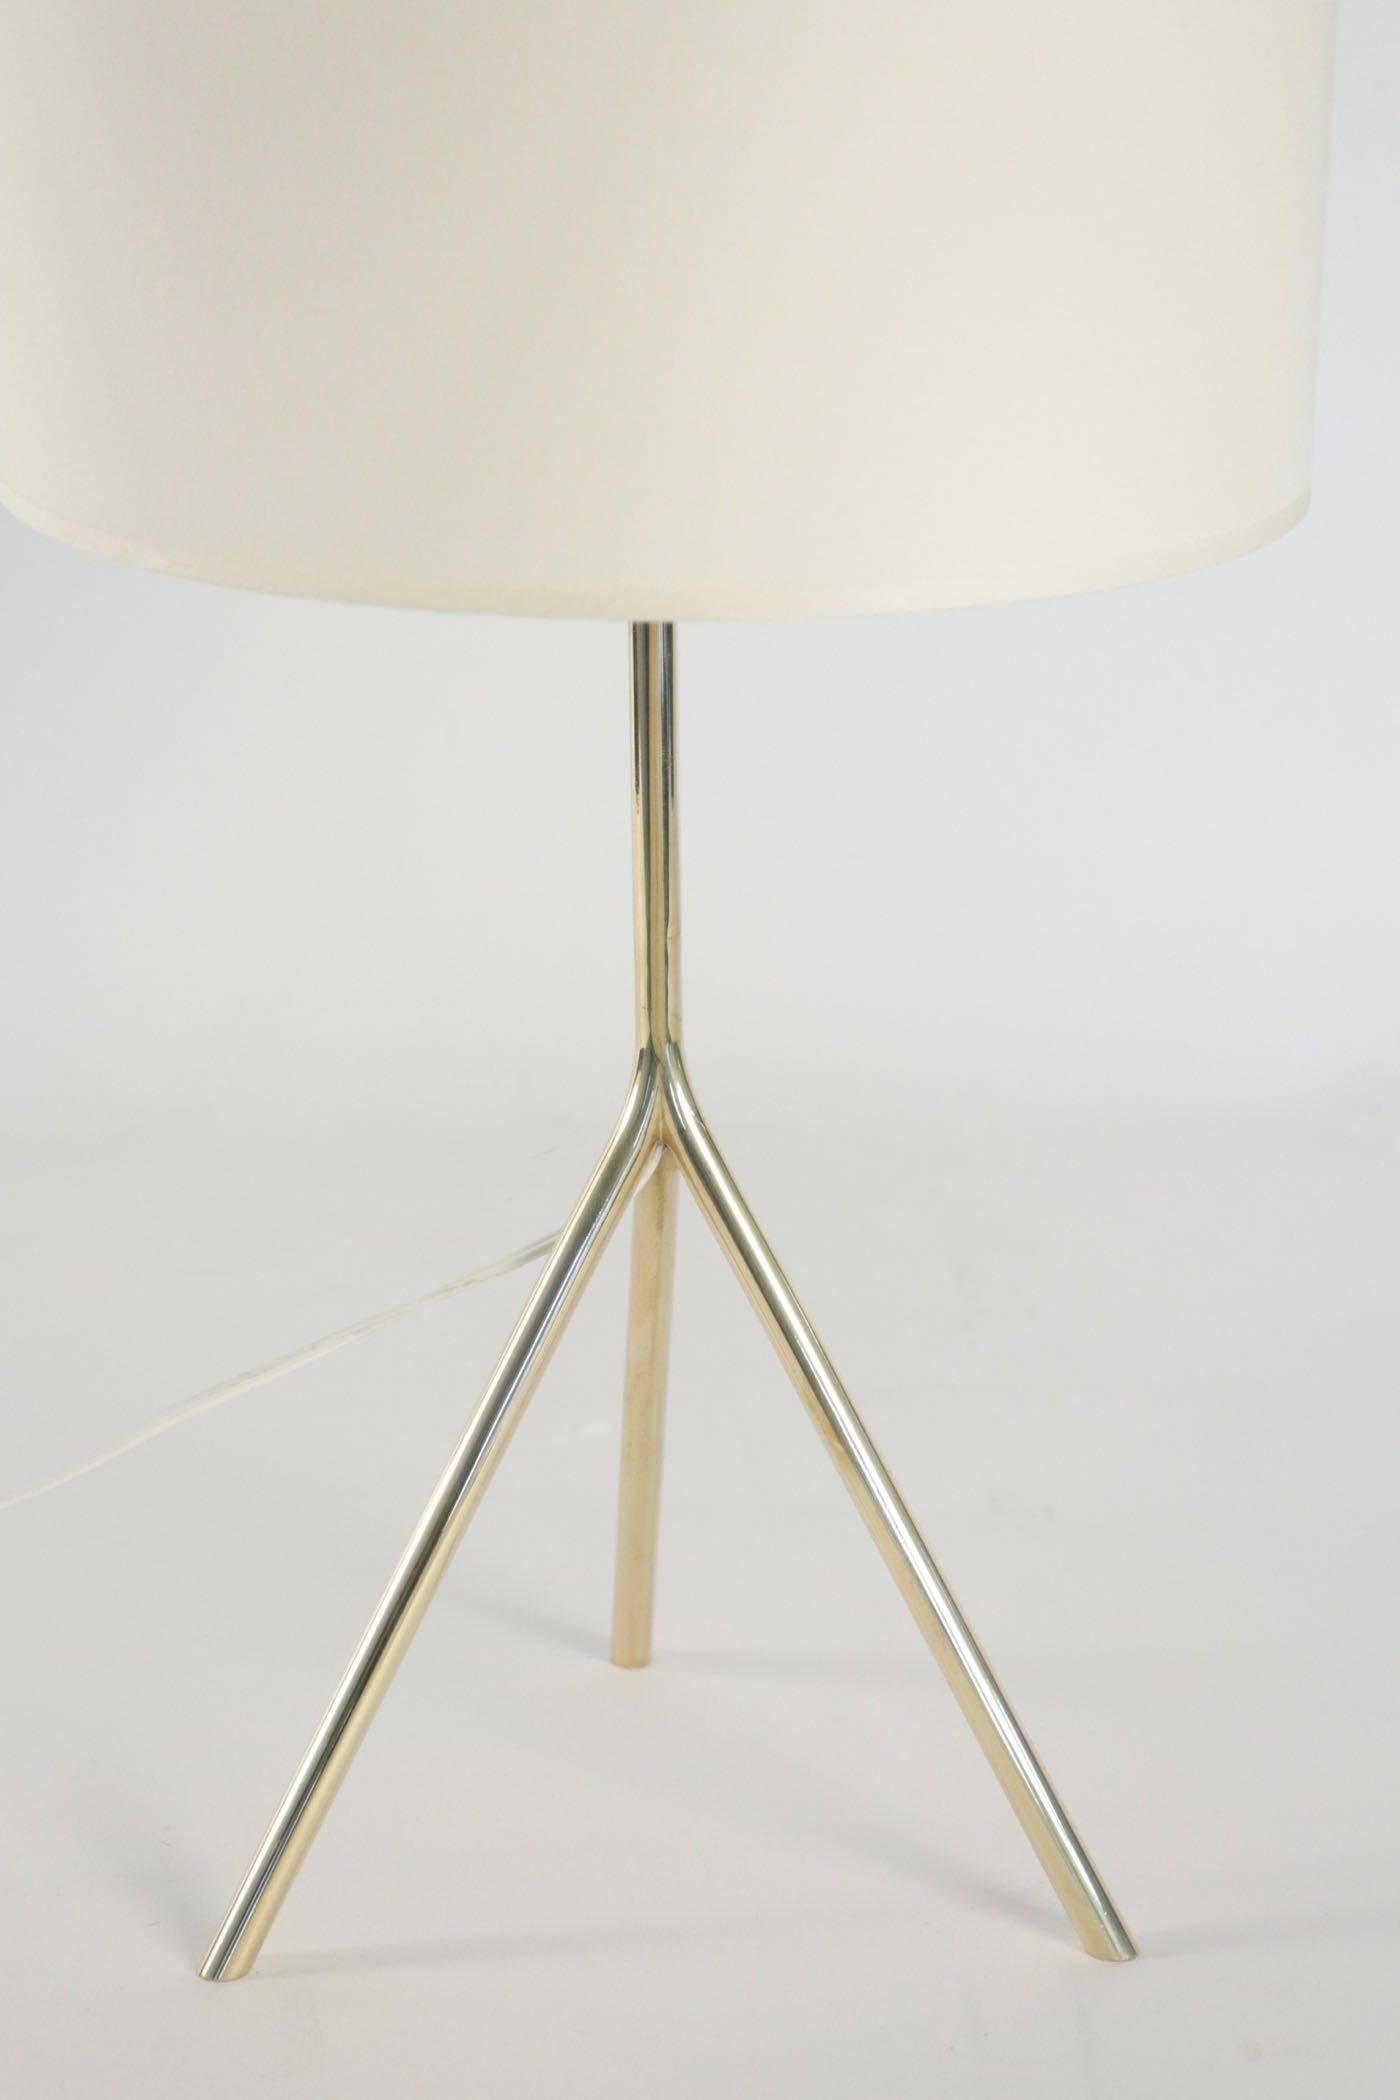 1950s gilded brass table lamp
Tripod base lamp made of gilded brass. 
Handmade lampshade of off-white cotton granted to the original.
One bulb.